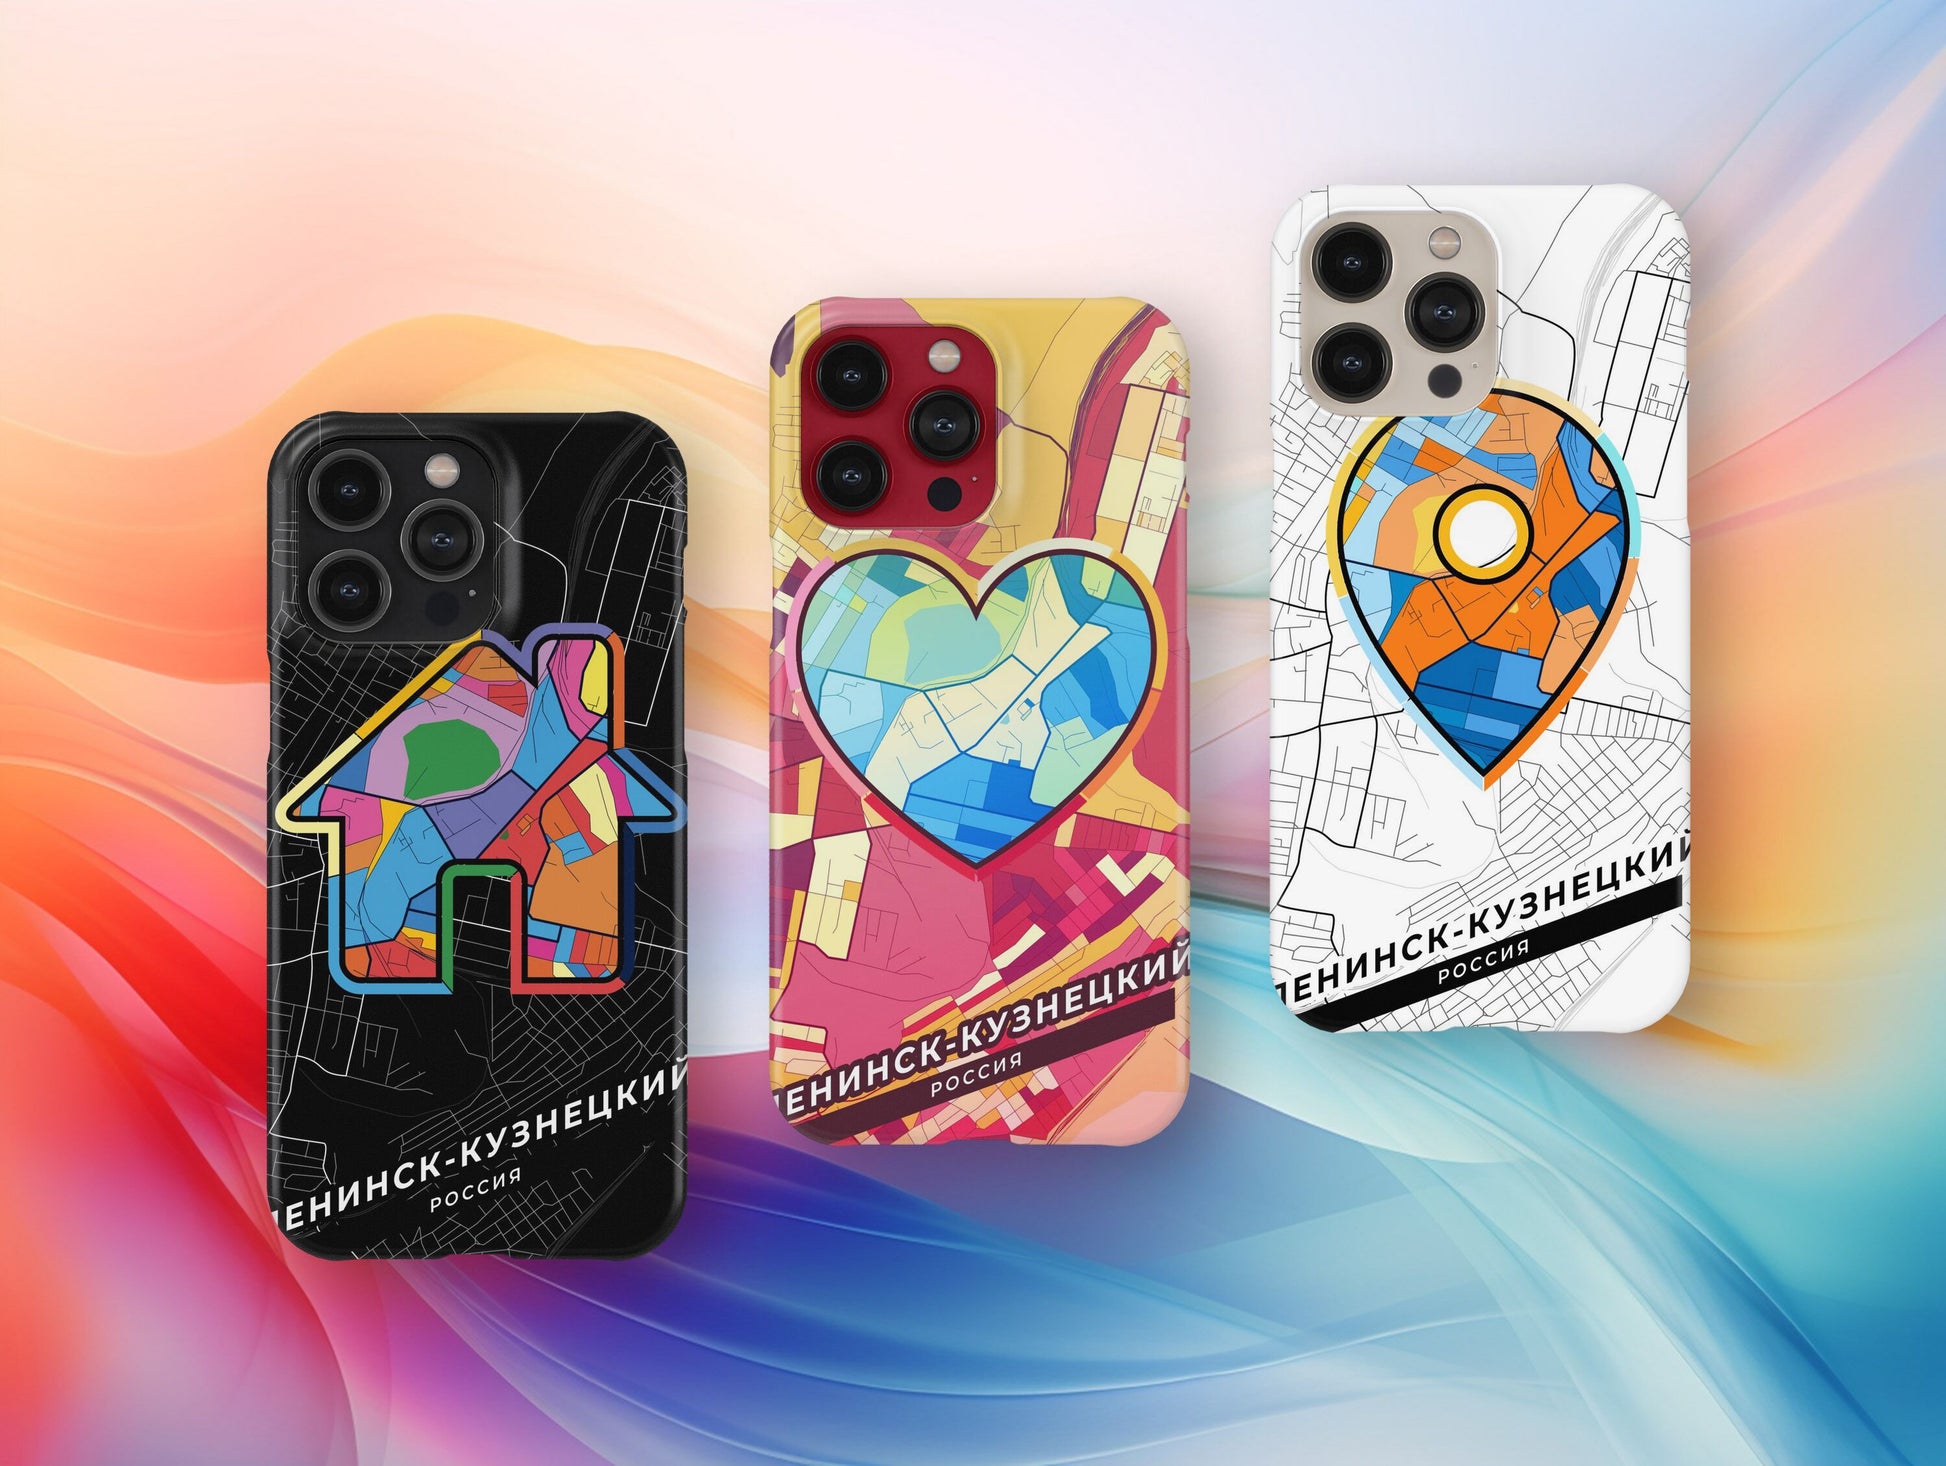 Leninsk-Kuznetsky Russia slim phone case with colorful icon. Birthday, wedding or housewarming gift. Couple match cases.